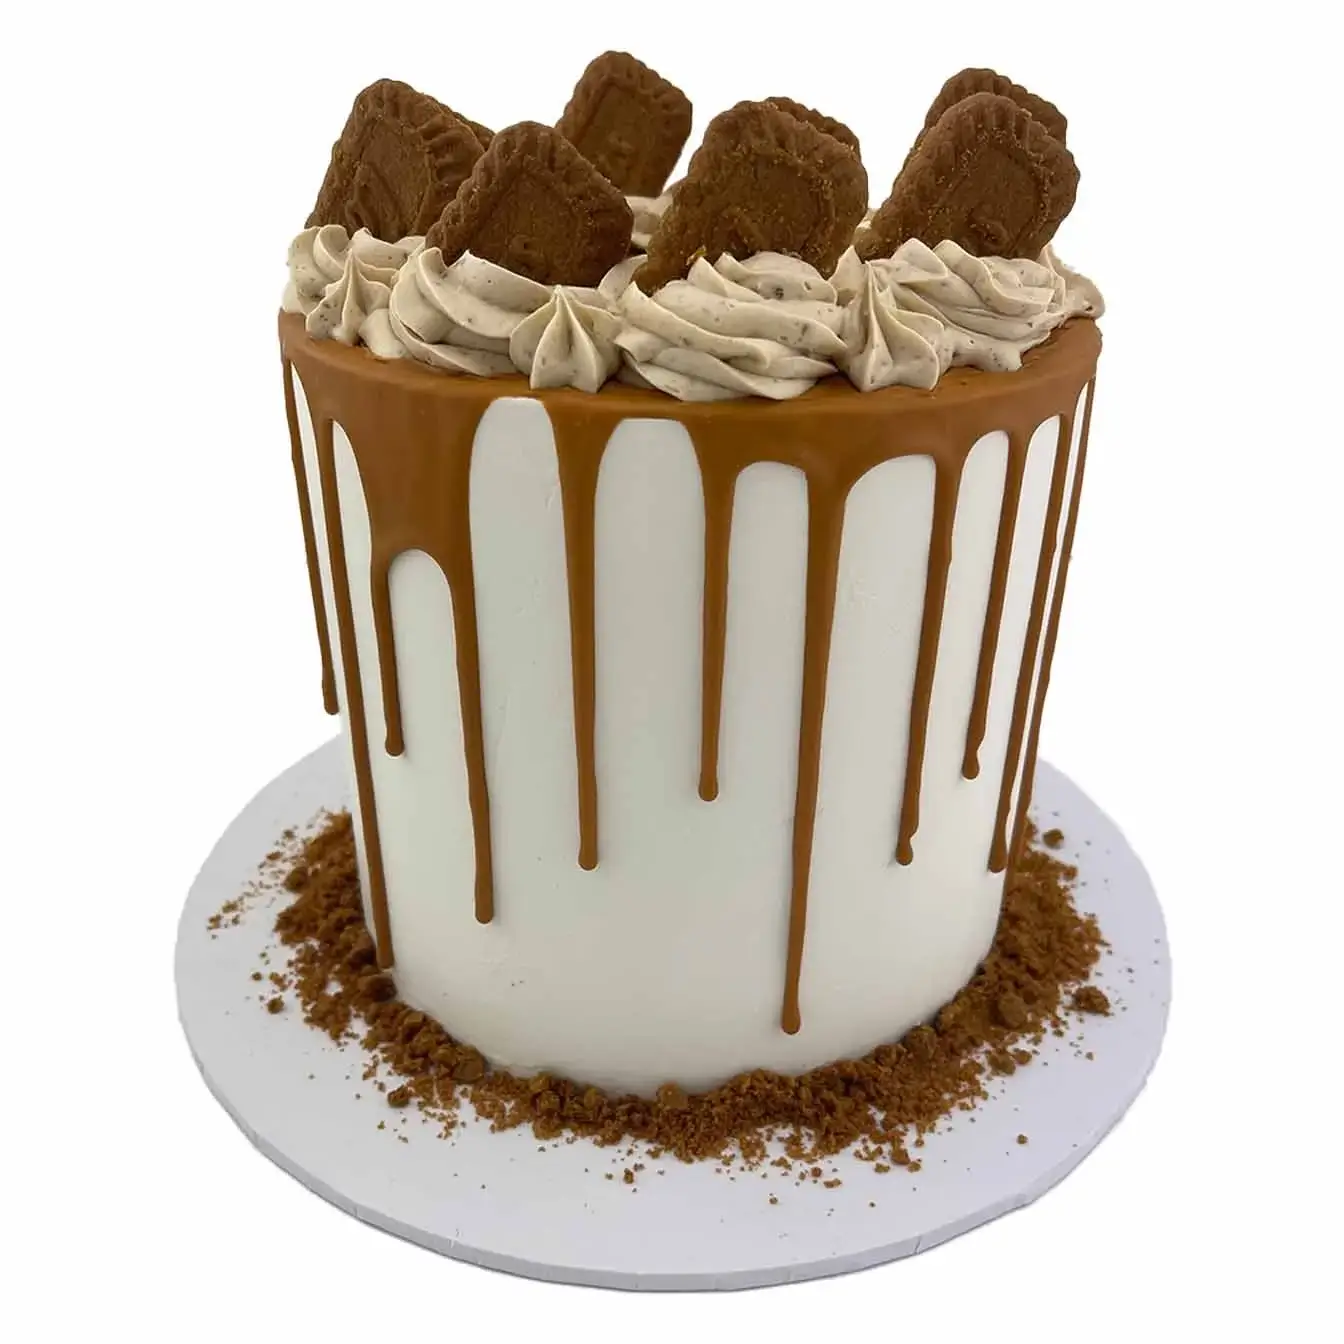 Biscoff Bliss Drip Cake - A cake with luscious Biscoff drip and cookie crumbles, a divine centrepiece for those who savor the sweet delights of Biscoff cookies.